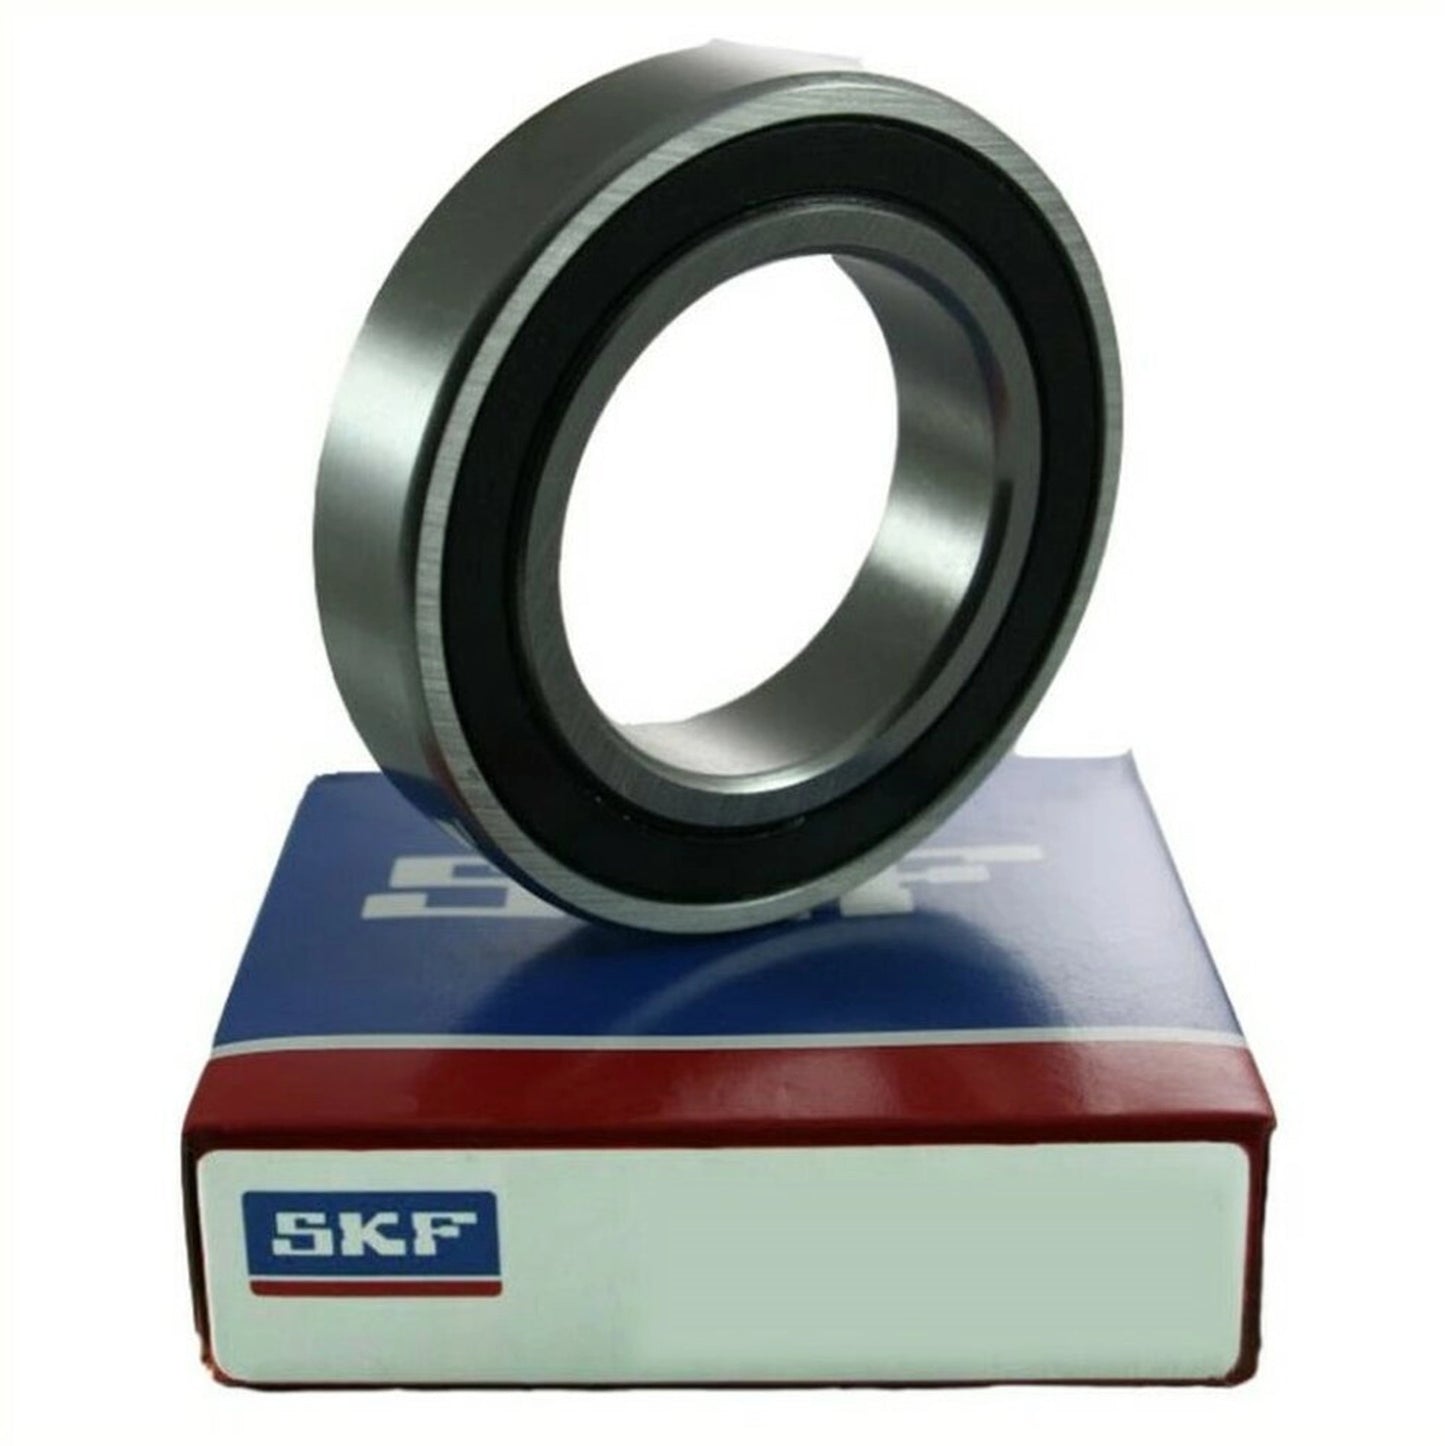 Lager 6305-Rs1 25x62x17 SKF